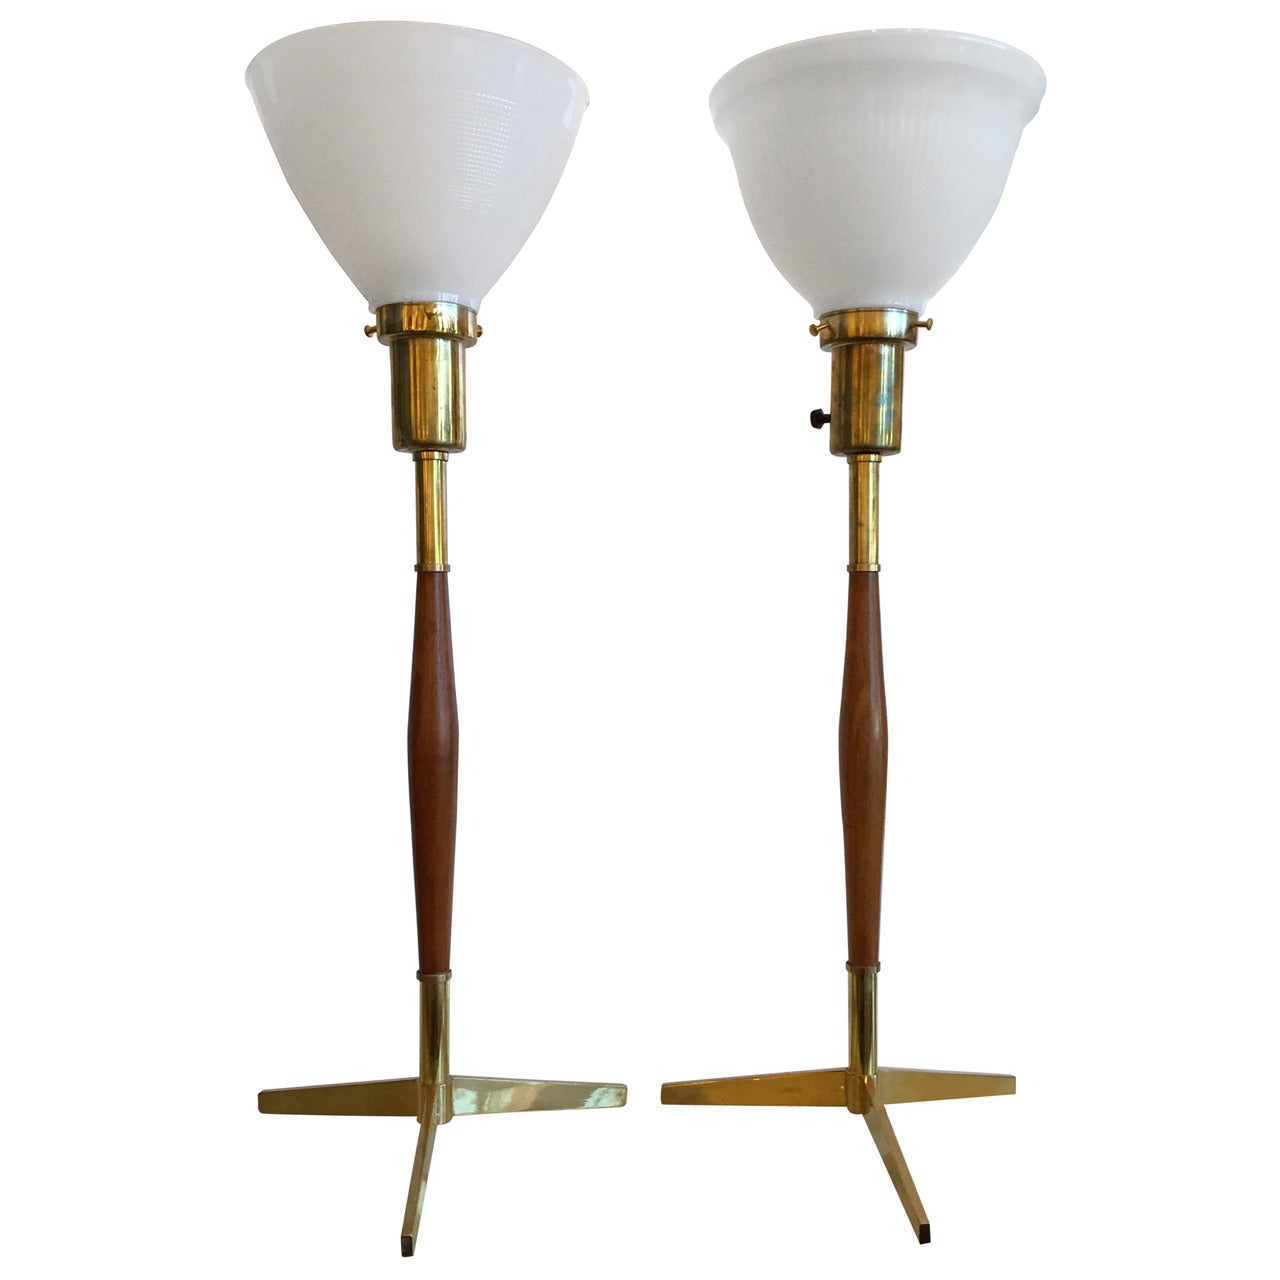 Pair of Tripod Base Table Lamps by Gerald Thurston for Lightolier